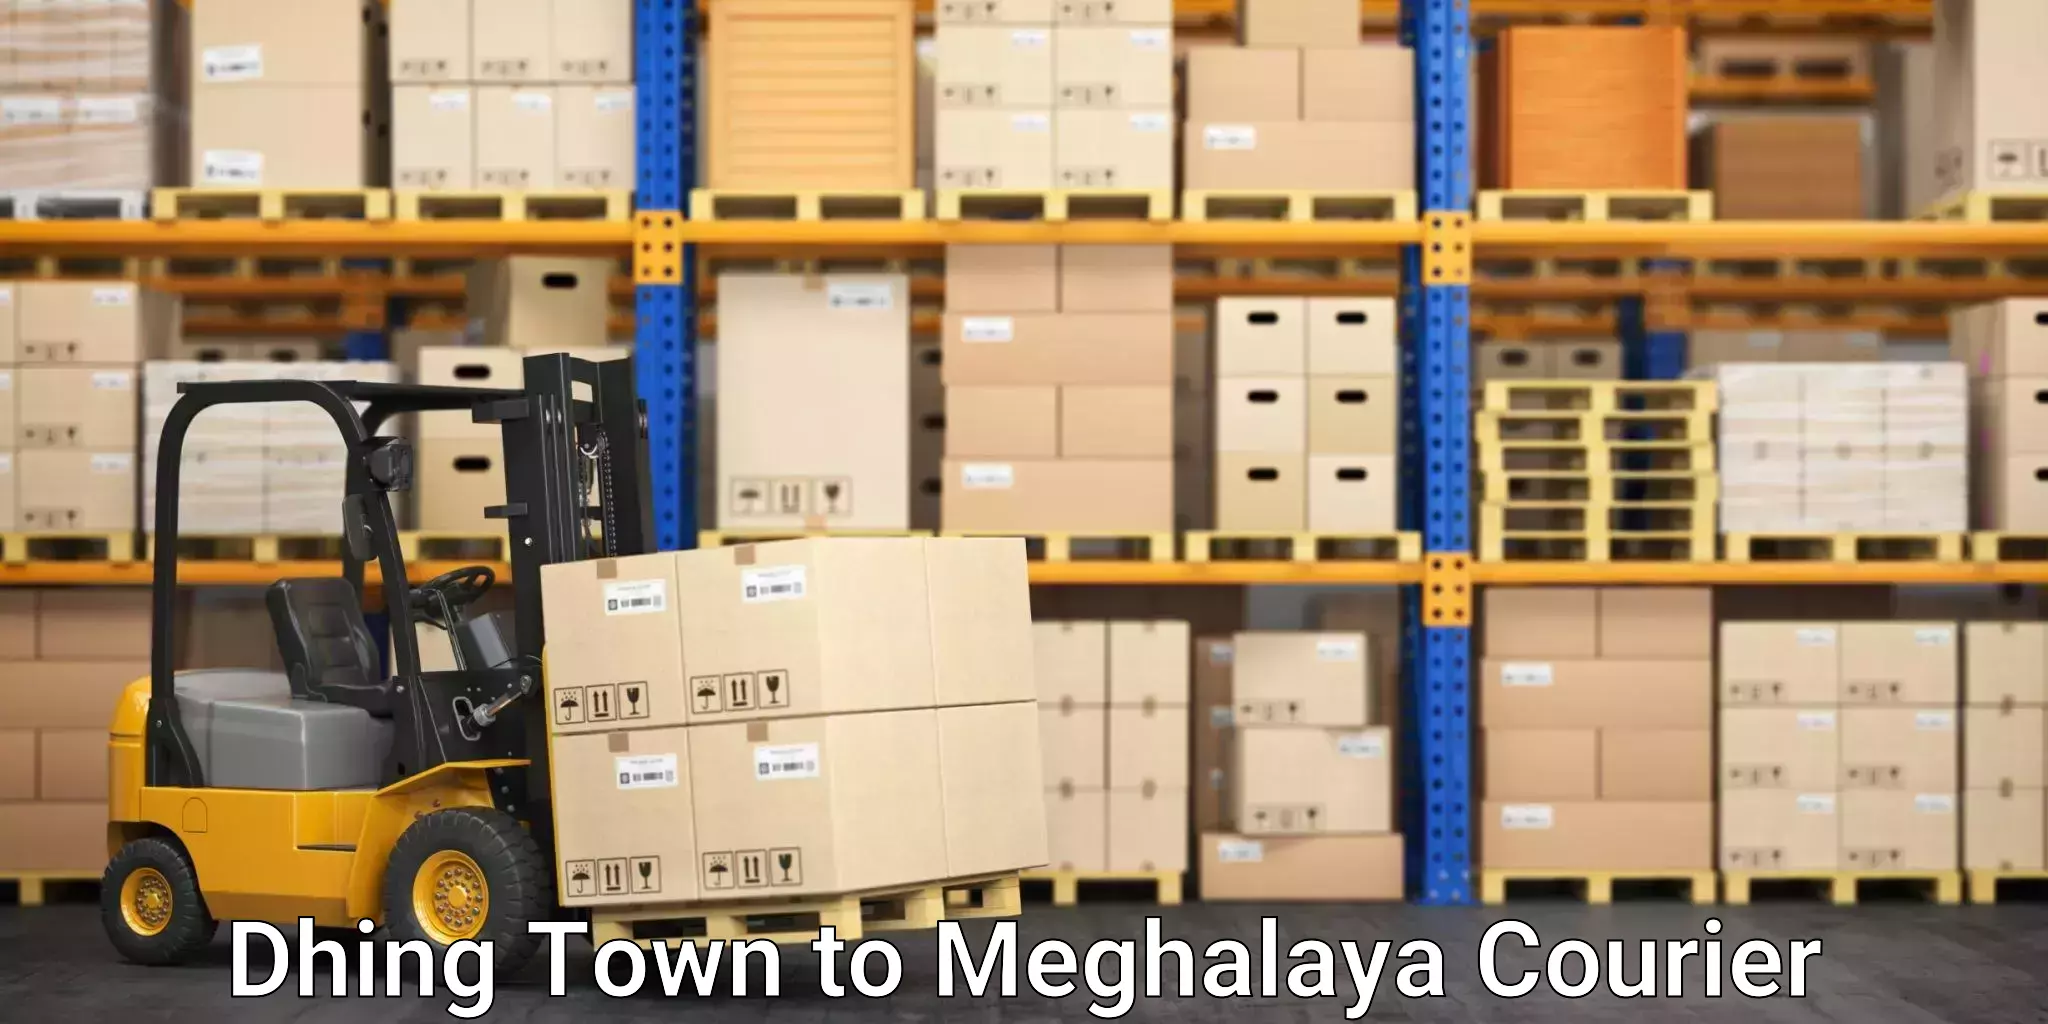 Urgent courier needs Dhing Town to Meghalaya